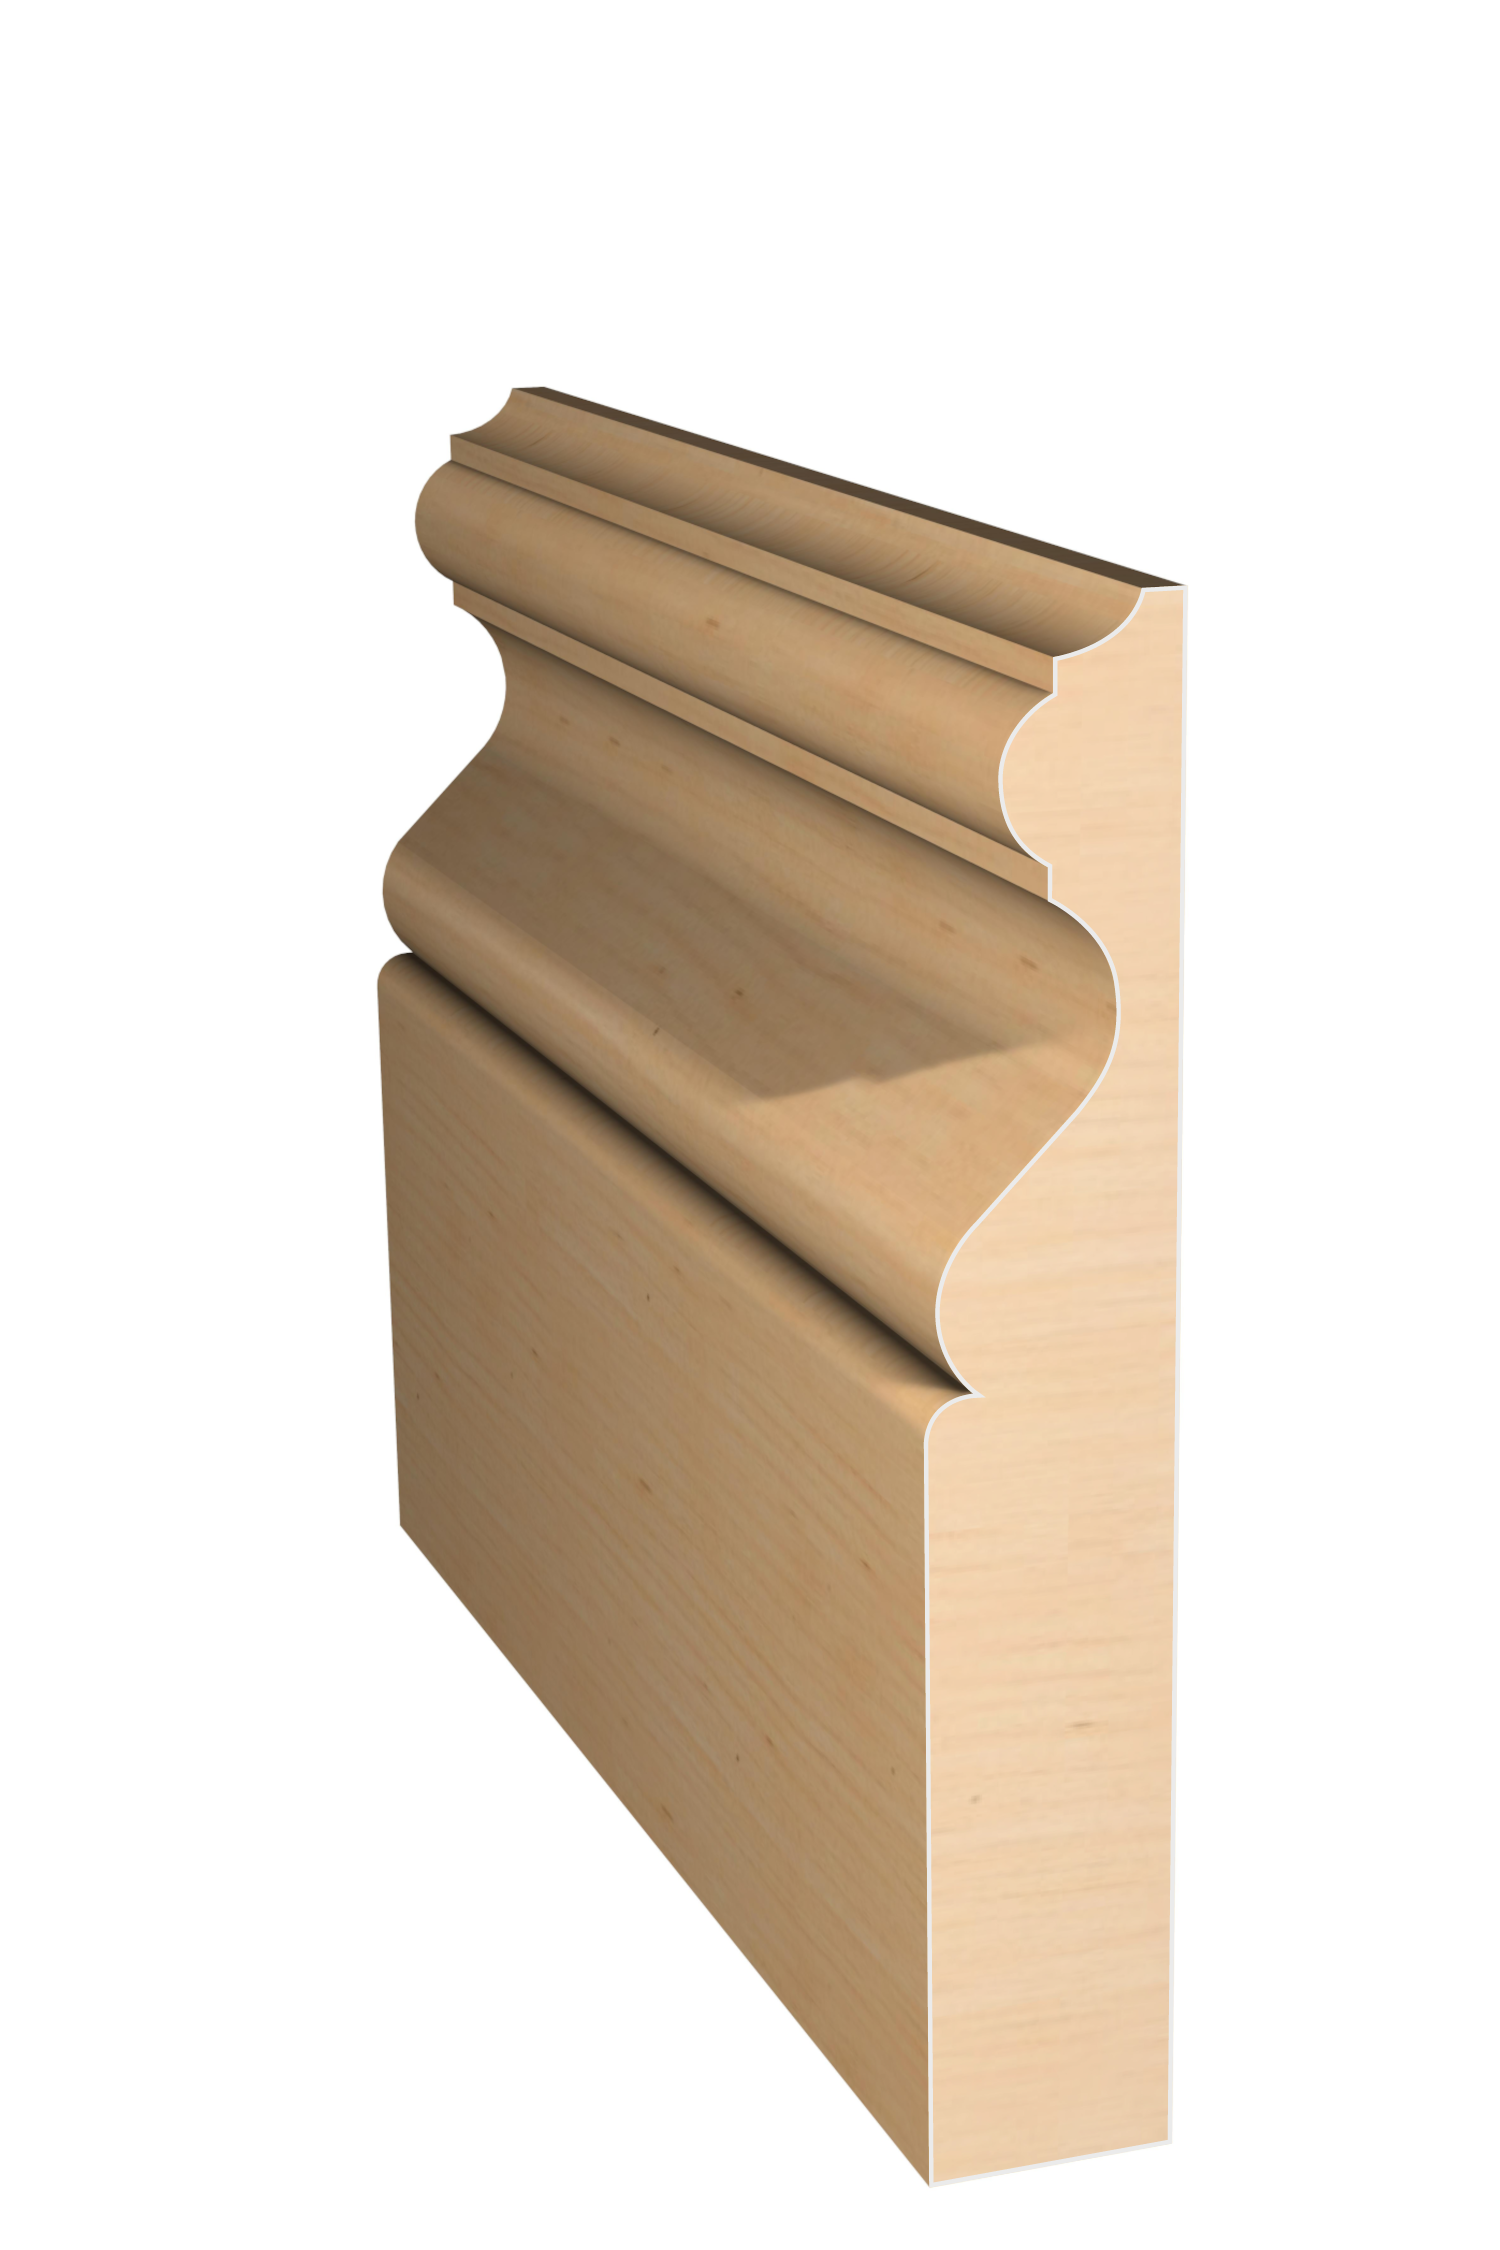 Three dimensional rendering of custom base wood molding BAPL4129 made by Public Lumber Company in Detroit.